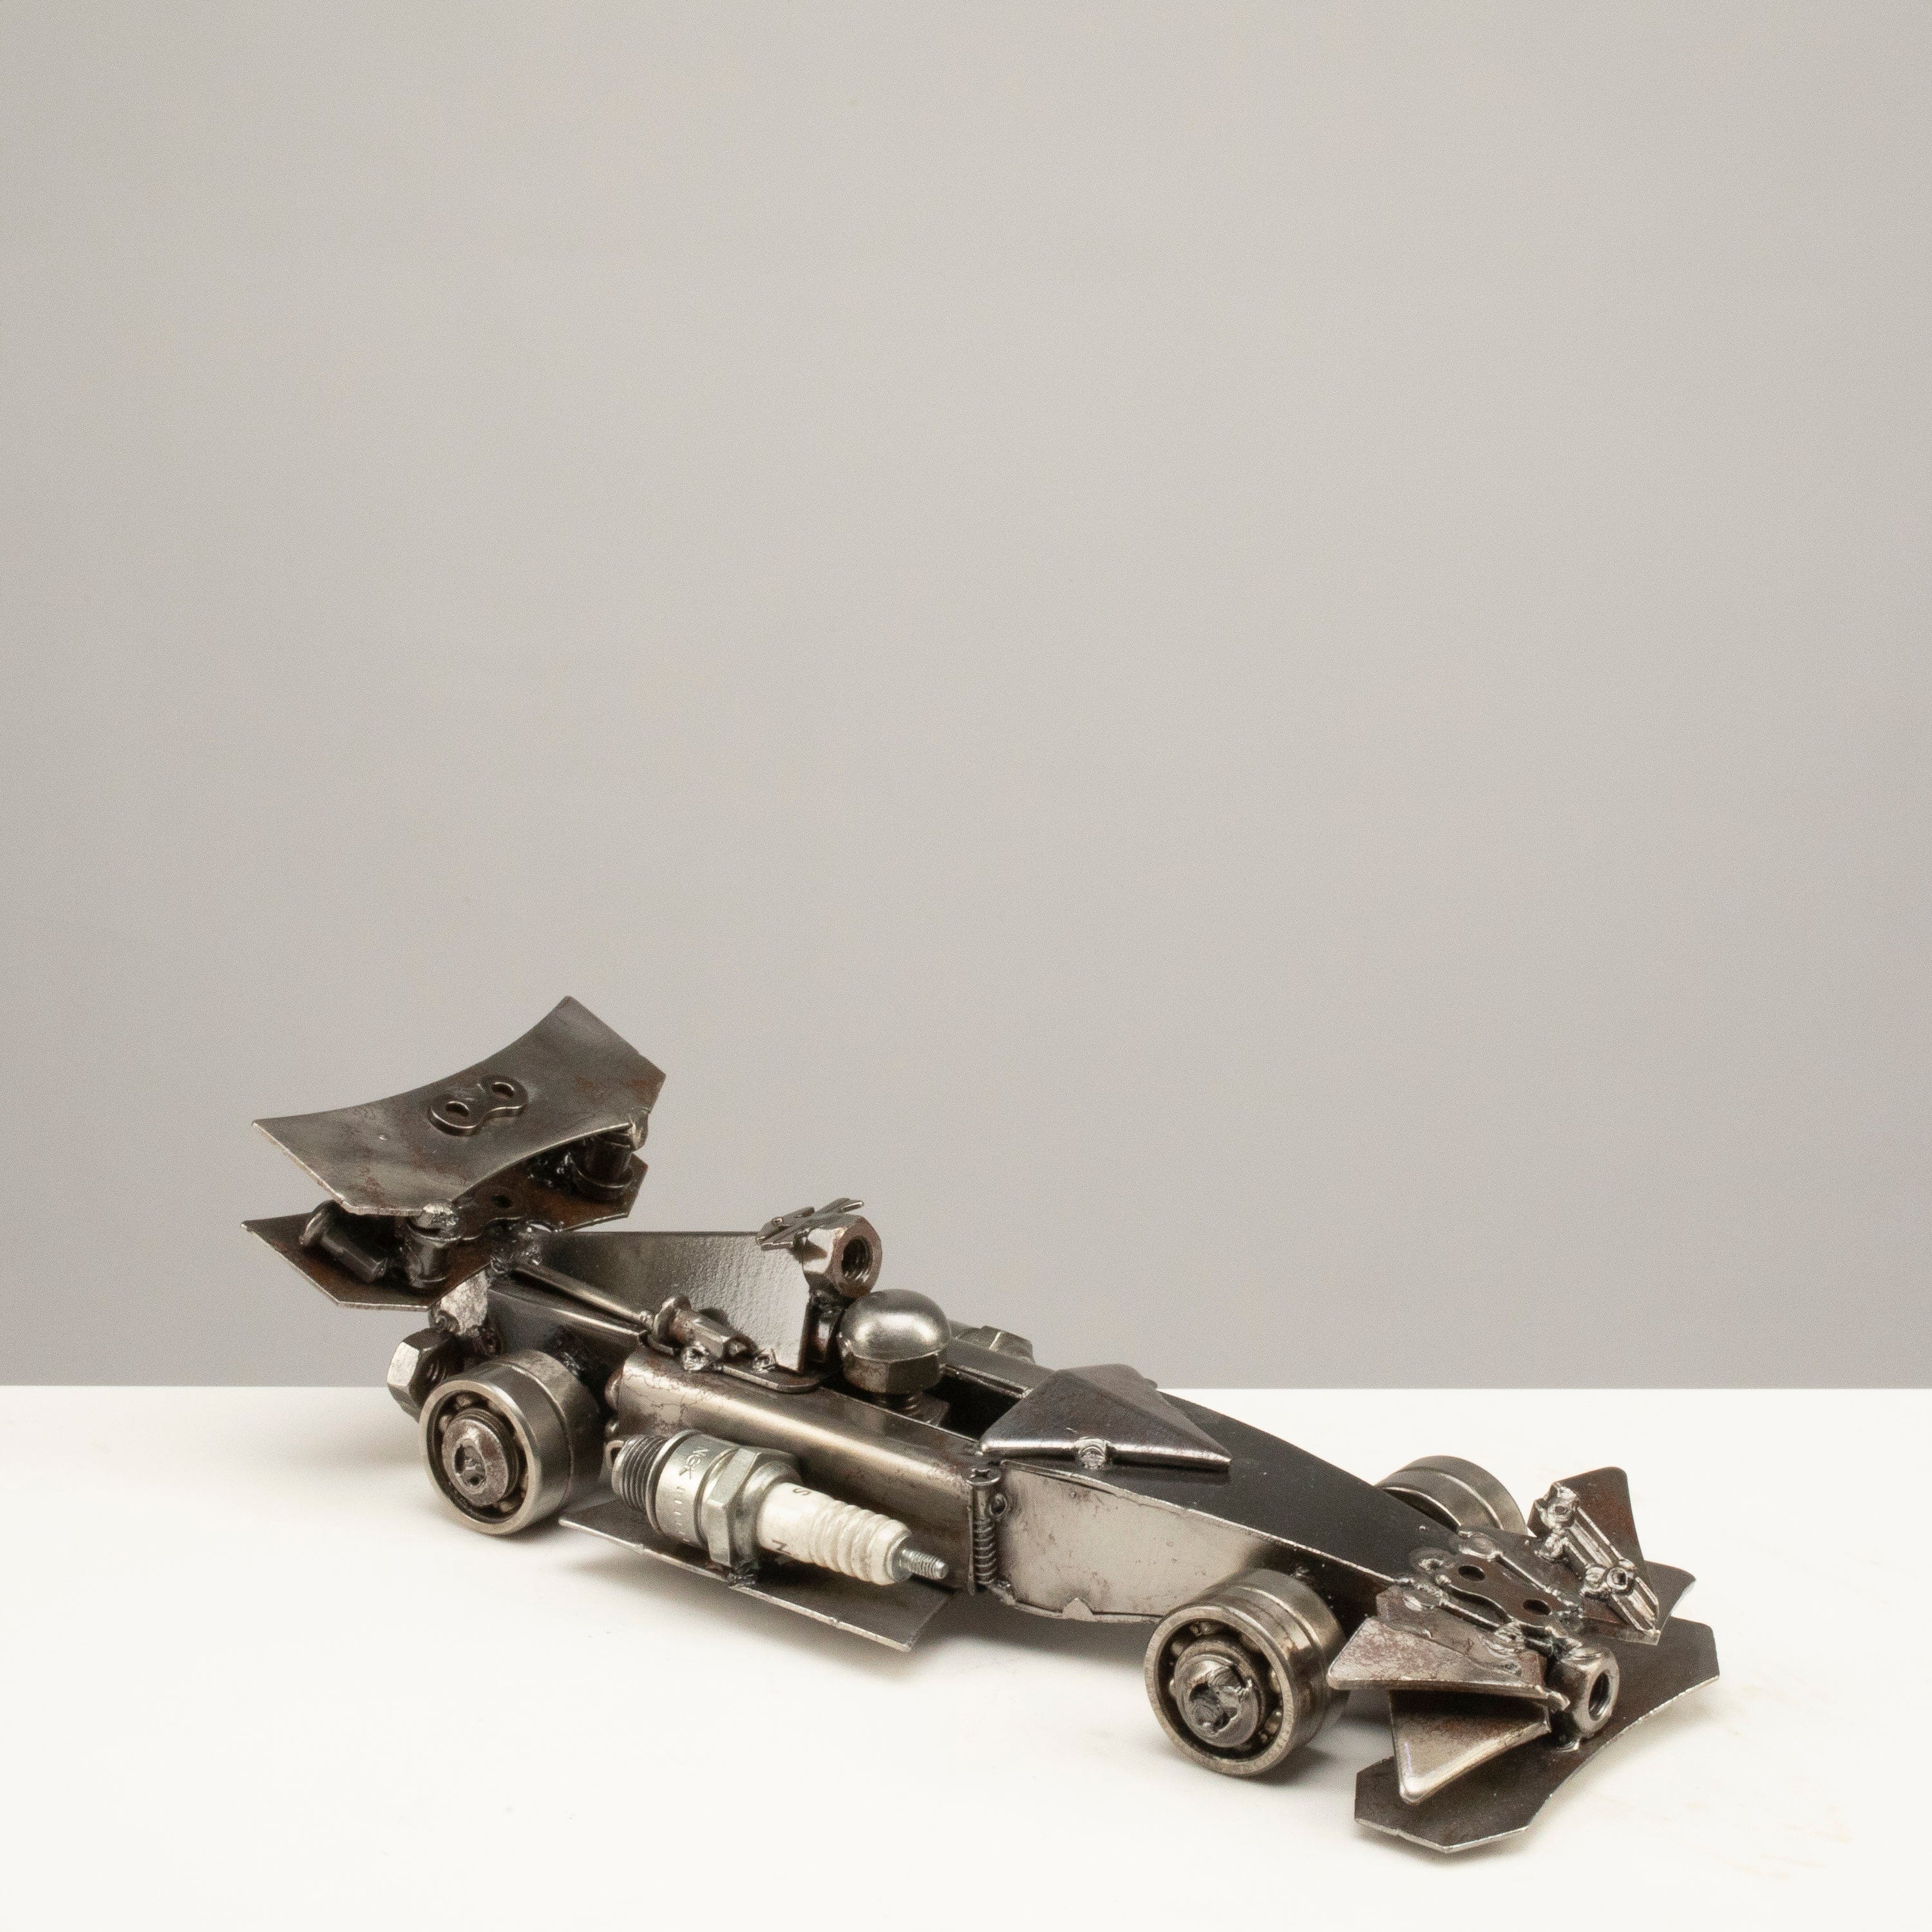 Kalifano Recycled Metal Art 10.5" F1 (Formula 1) Inspired Recycled Metal Car RMS-800F1-N